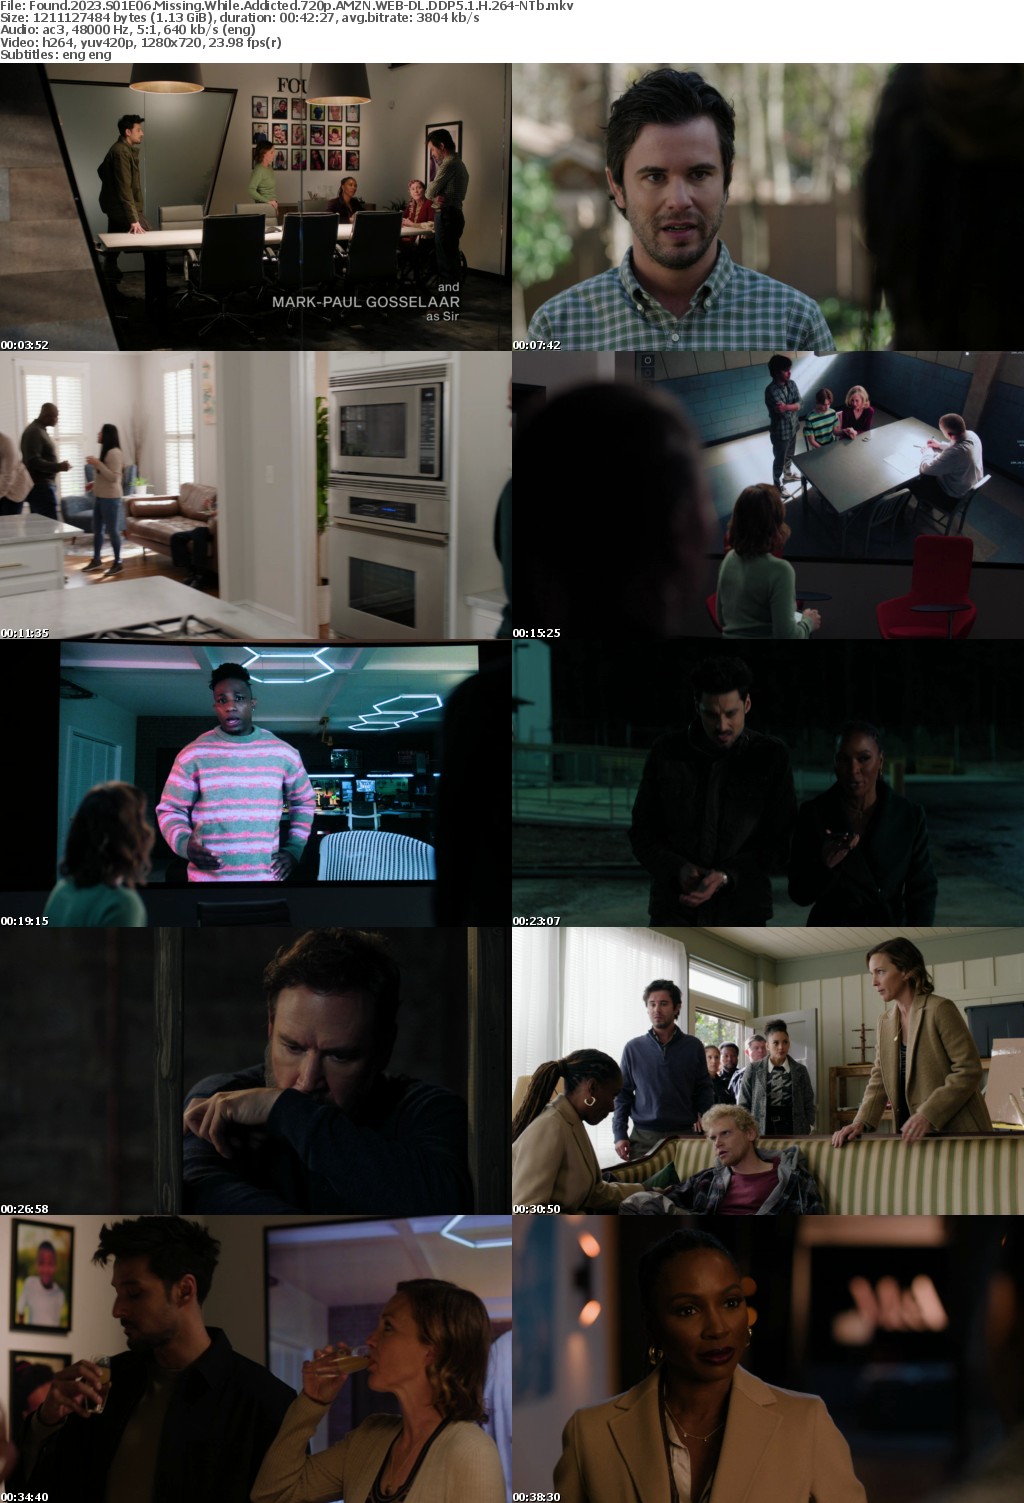 Found 2023 S01E06 Missing While Addicted 720p AMZN WEB-DL DDP5 1 H 264-NTb